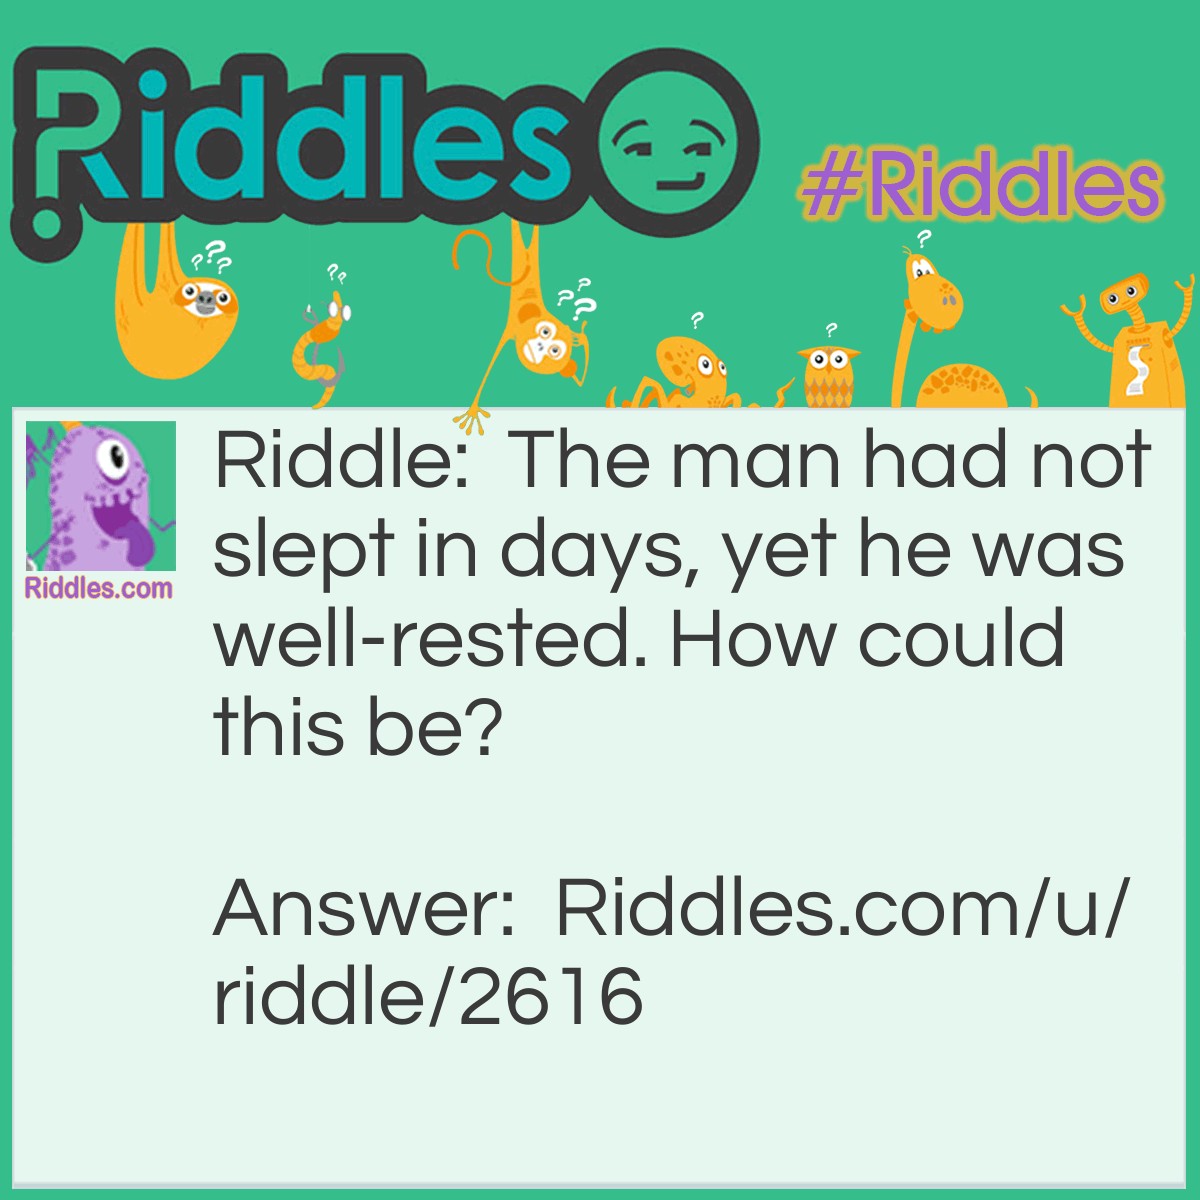 Riddle: The man had not slept in days, yet he was well-rested. How could this be? Answer: He only sleeps at nights (he had not slept in DAYS)